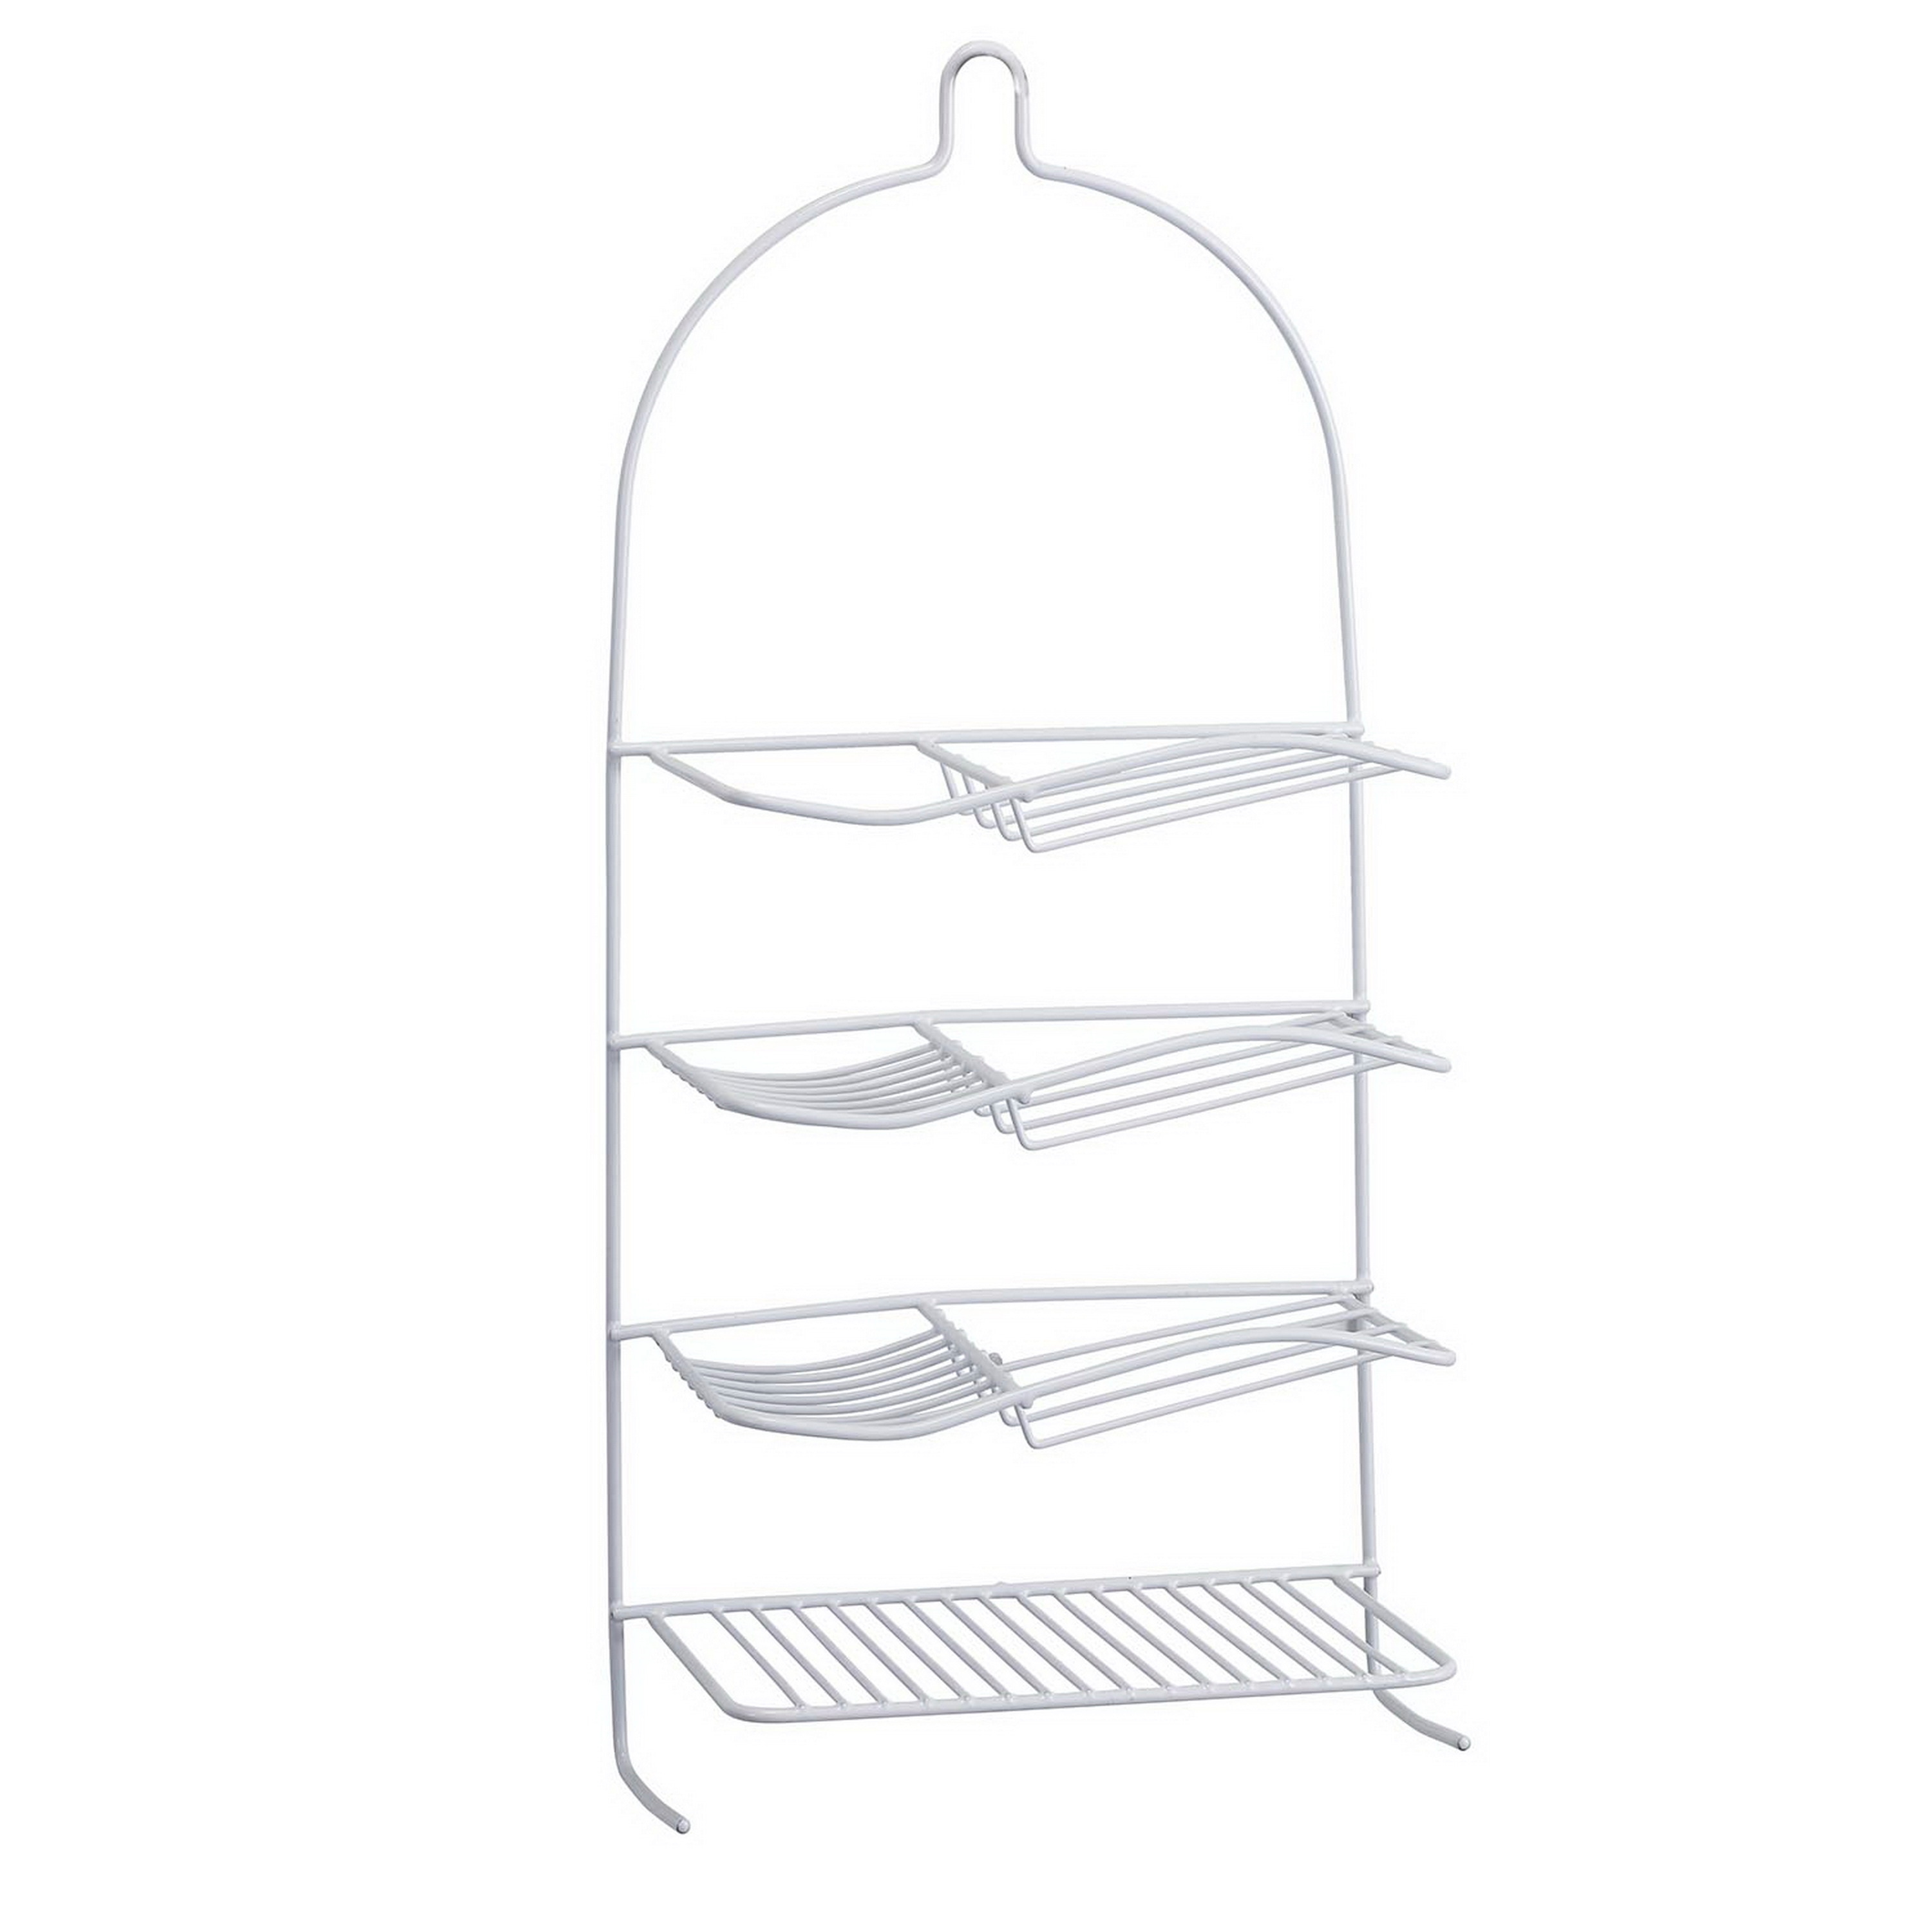 Oil Rubbed Bronze Kenney 3-Shelf Hanging Shower Caddy